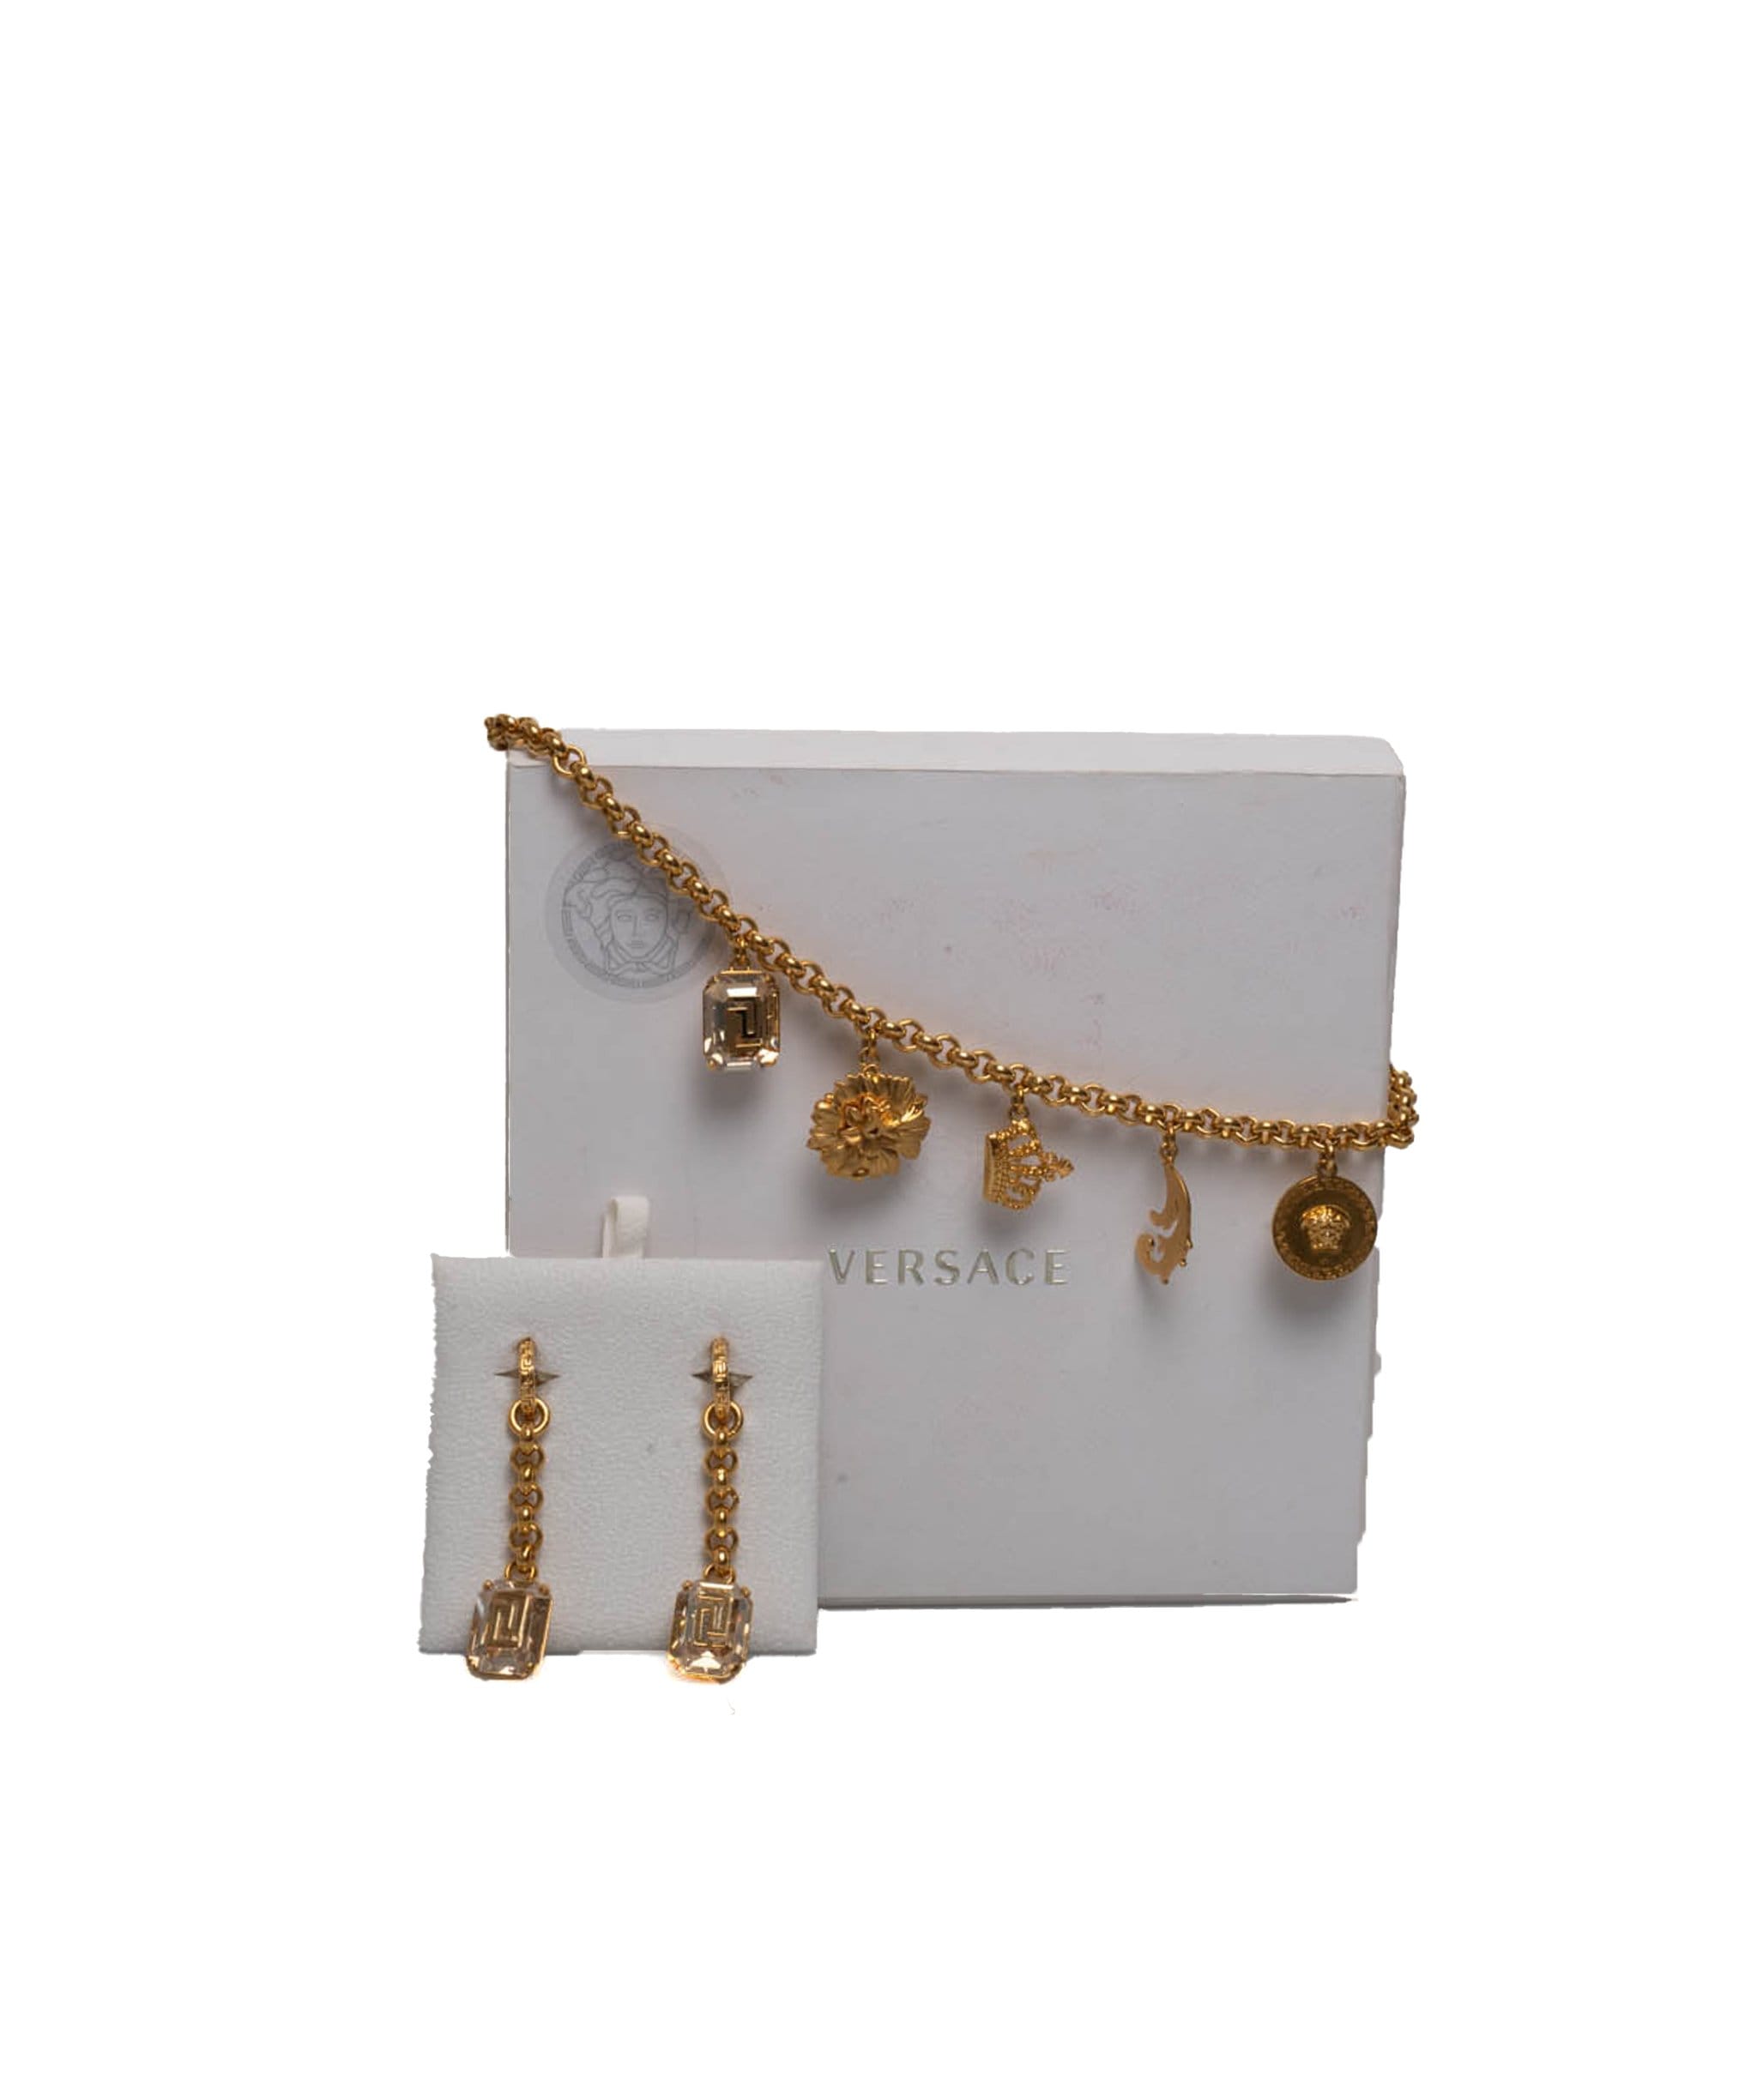 Versace Versace Necklace and Earring Set – ADL1563